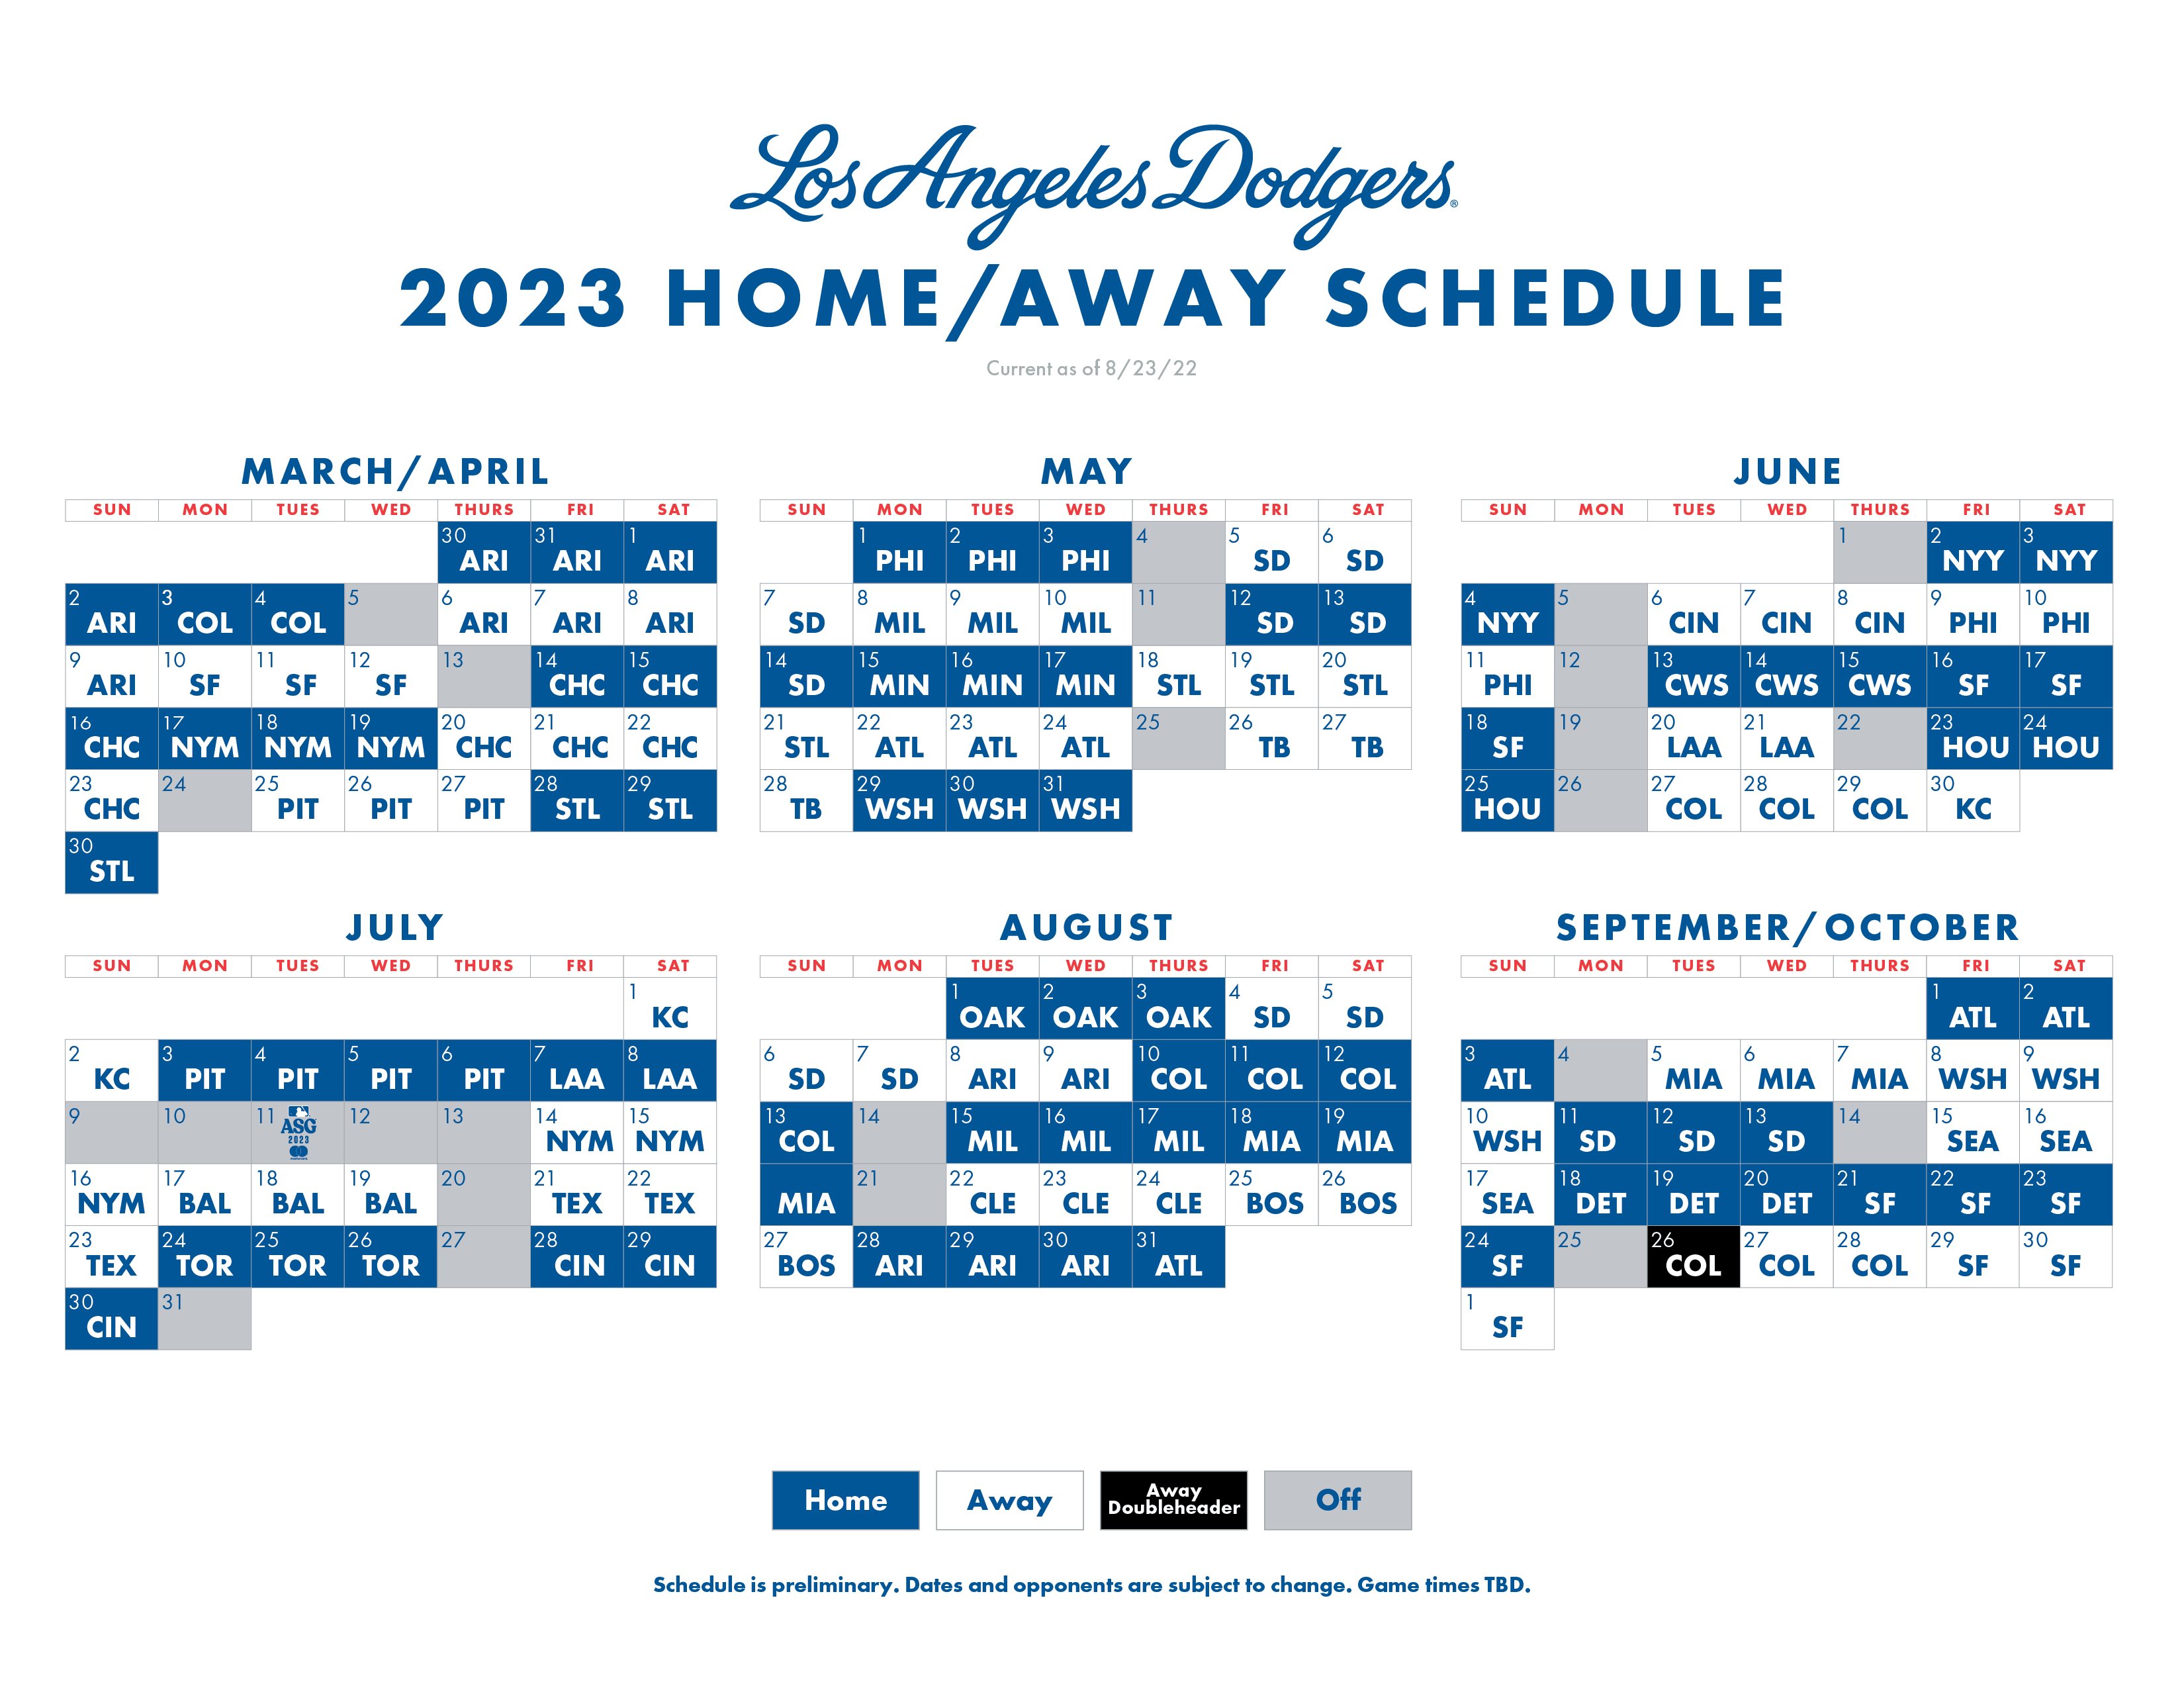 Los Angeles Dodgers on X: The 2023 schedule is here! Which series